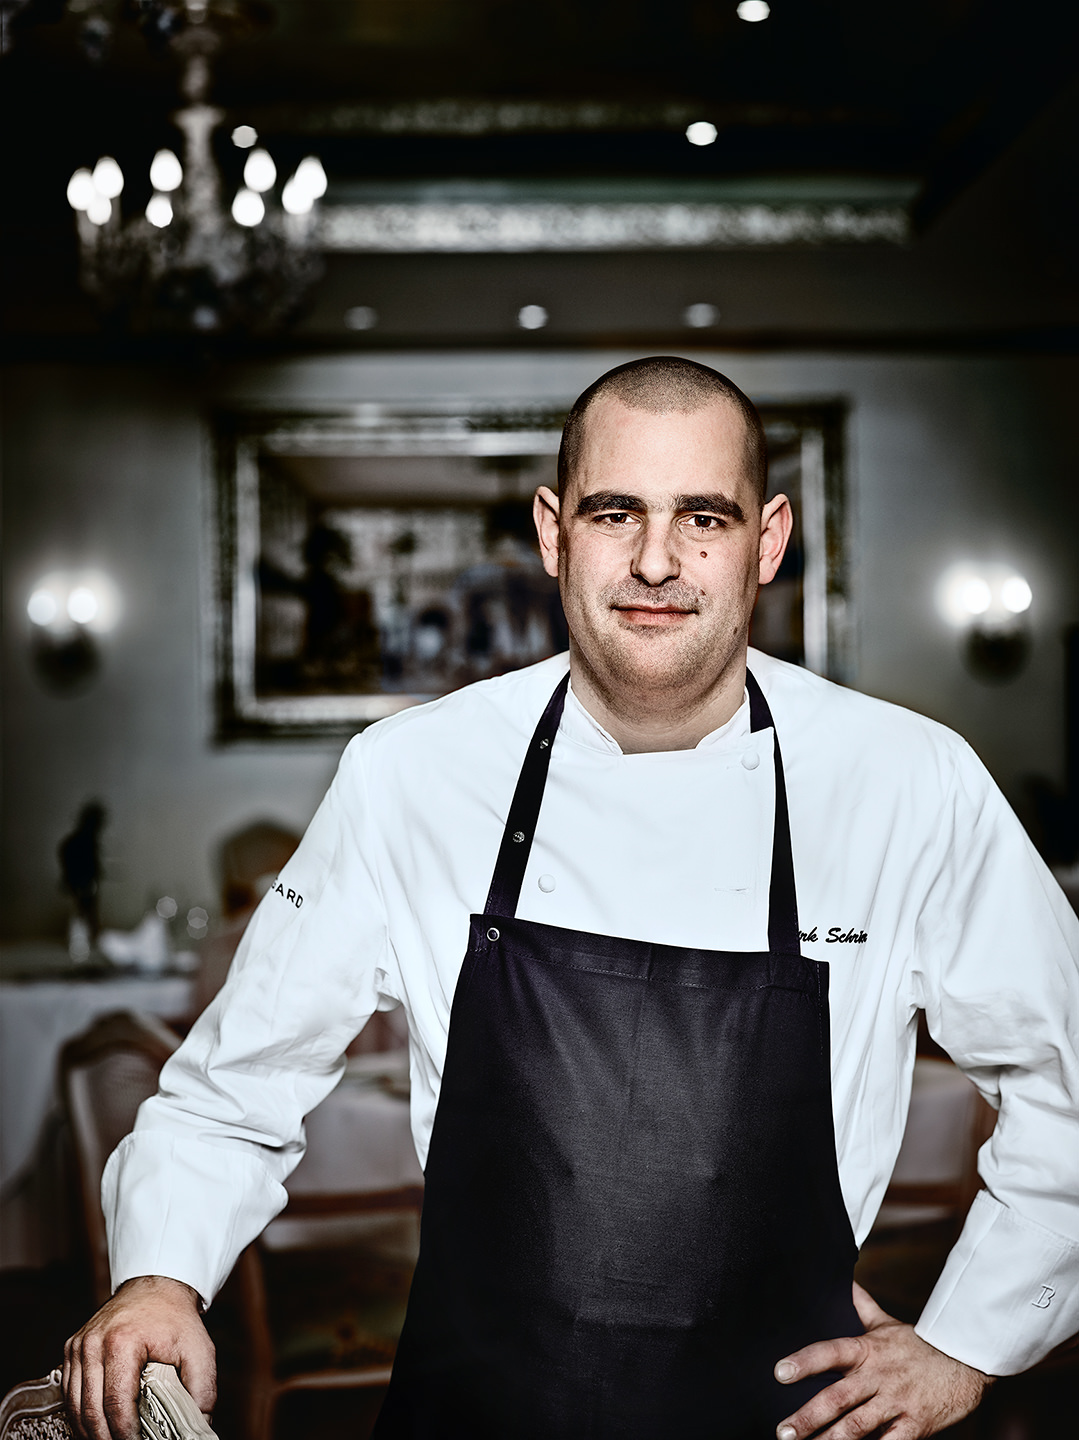 Star chef and Cook Of The Year Dirk Schröer